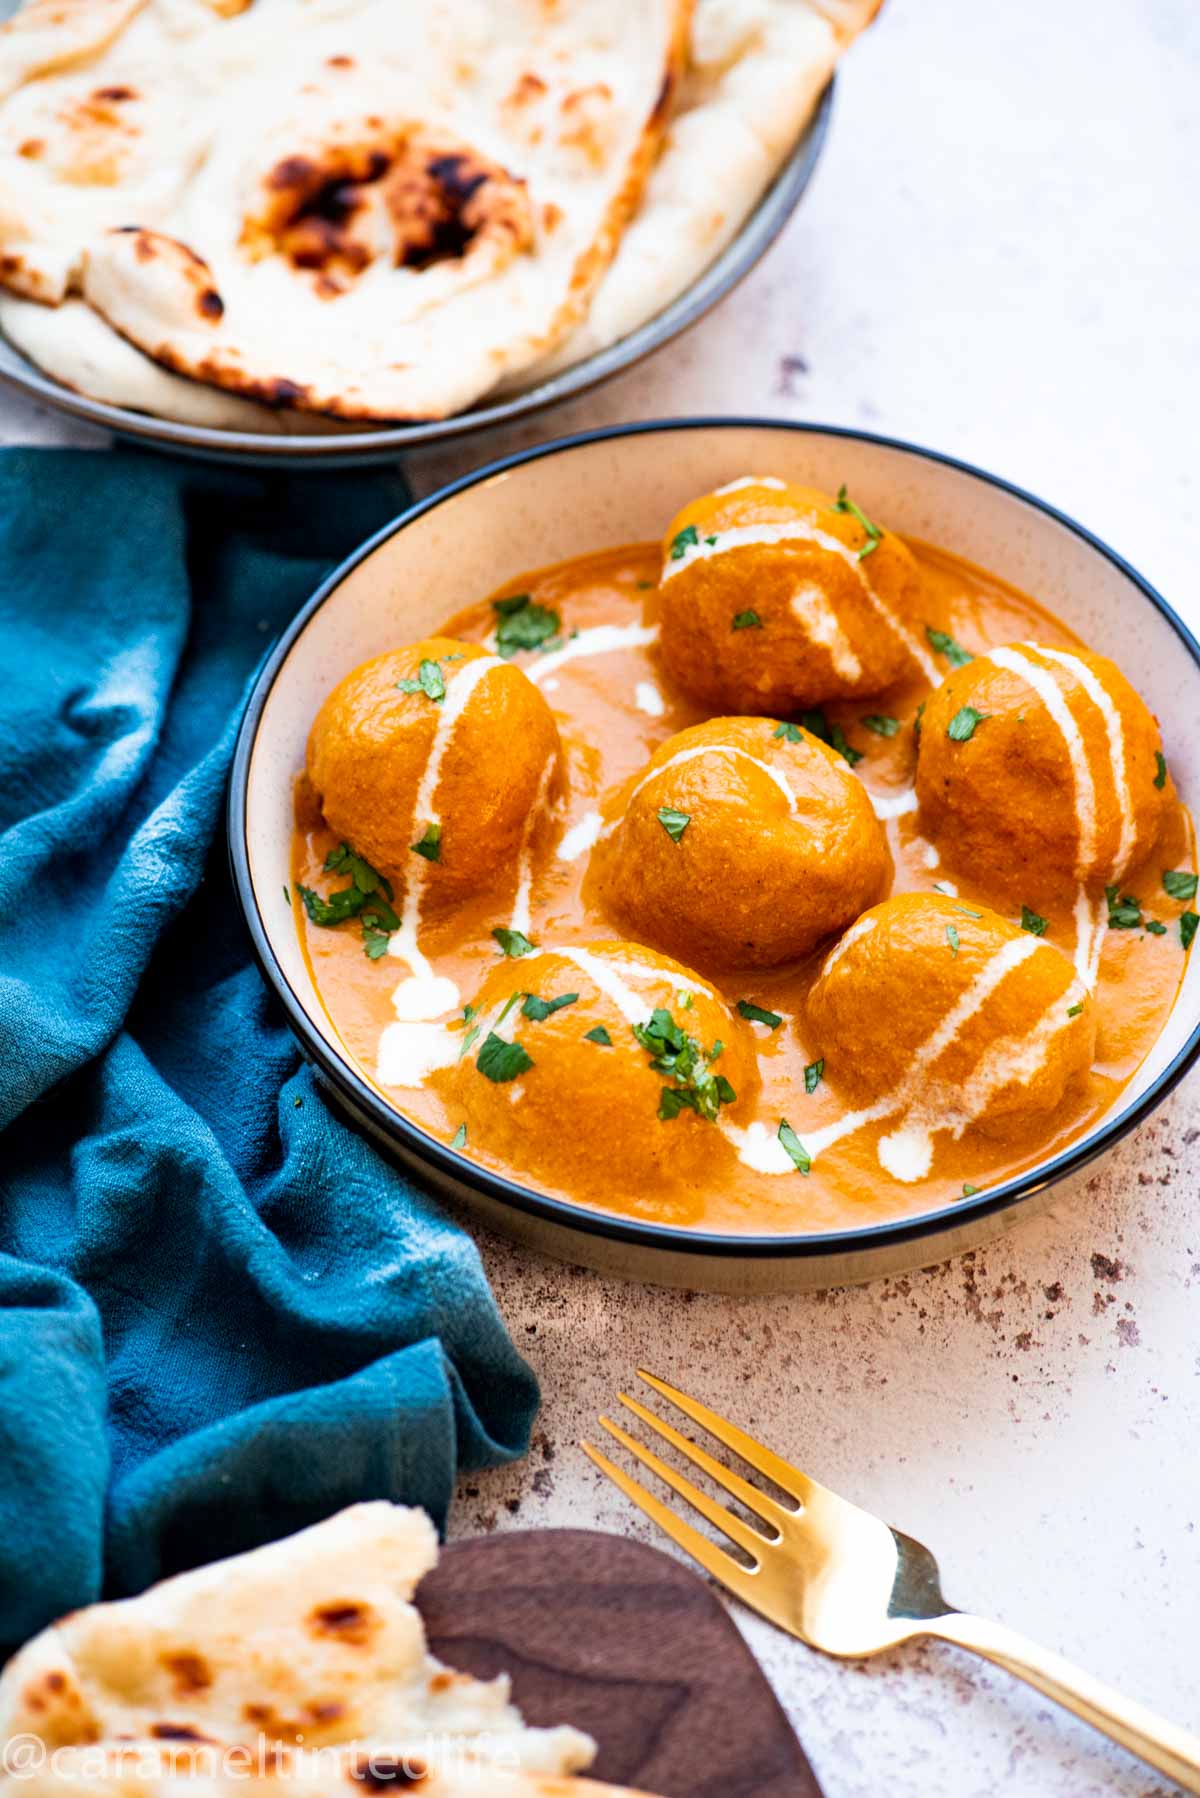 Malai kofta in a bowl neyt to a bluw cloth and plates of naan